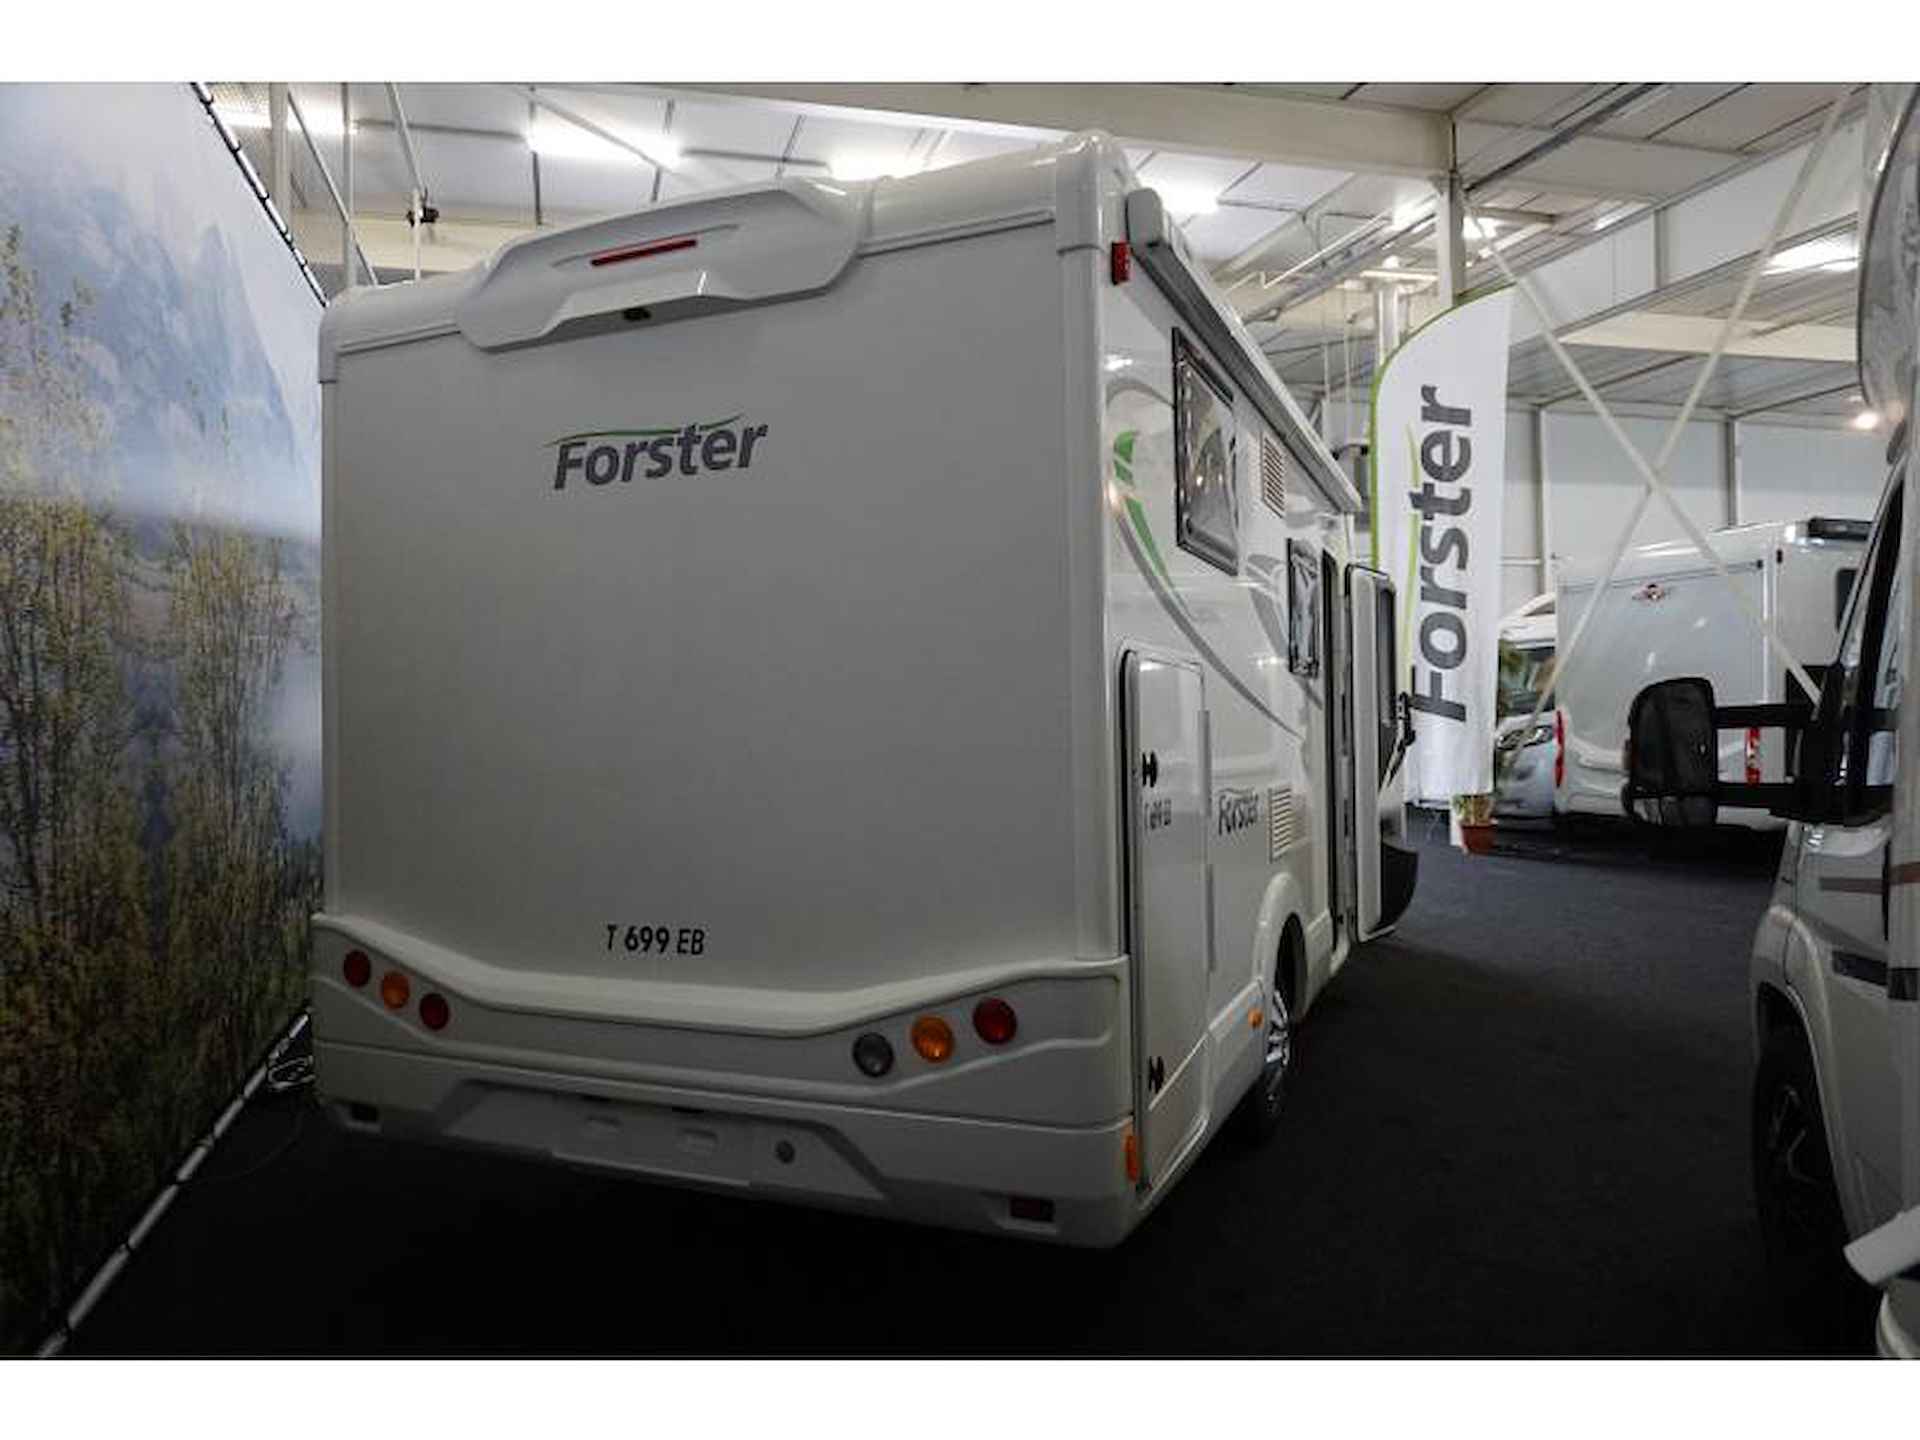 Forster T699EB - 4/15